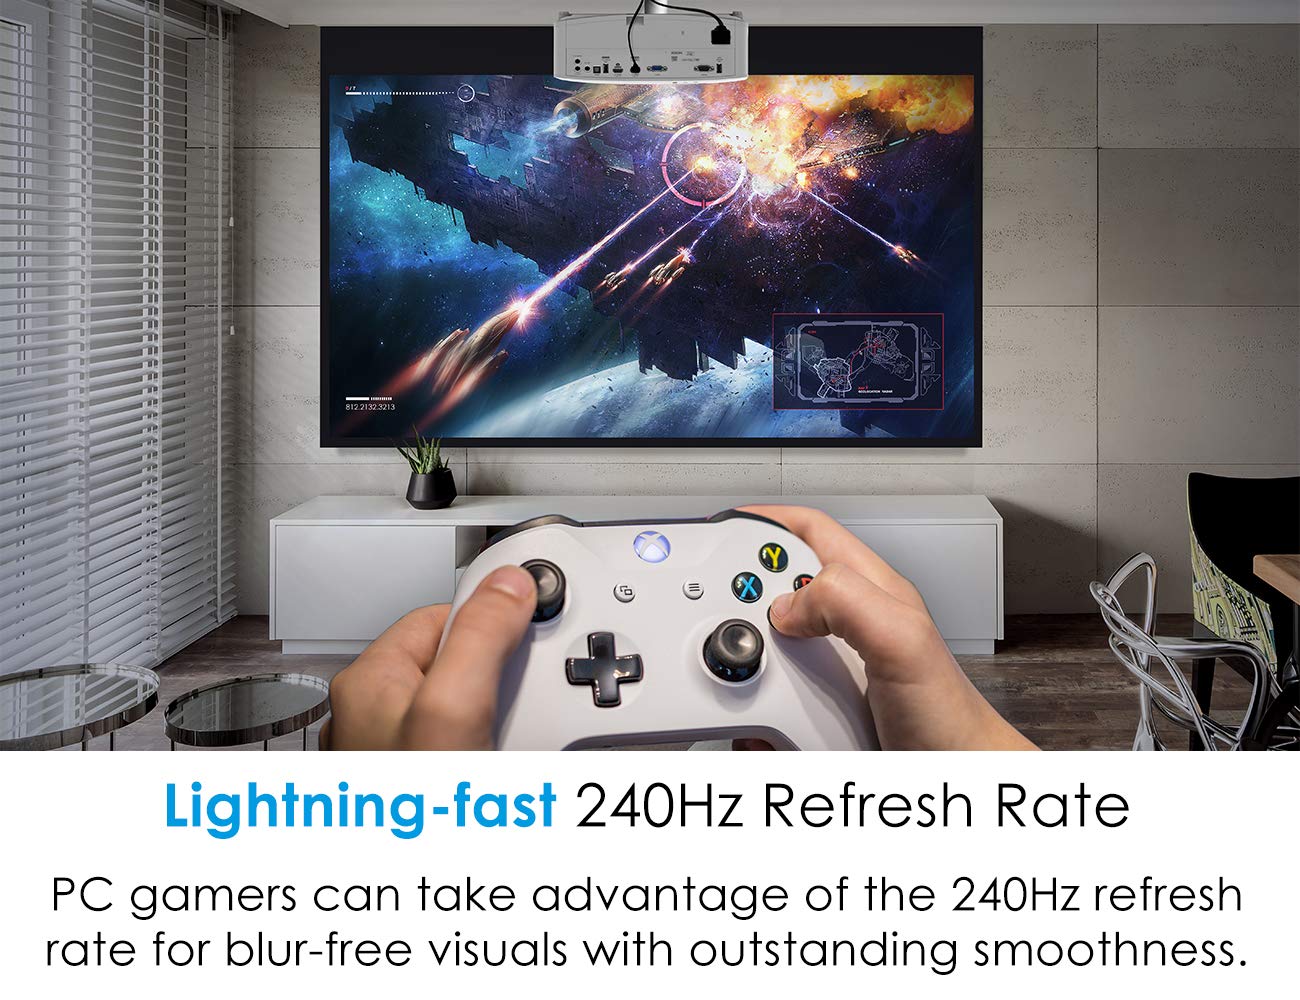 Optoma UHD30 True 4K UHD Gaming Projector | 16ms Response Time with Enhanced Gaming Mode | Lowest Input Lag on 4K Projector | 240Hz Refresh Rate | HDR10 & HLG